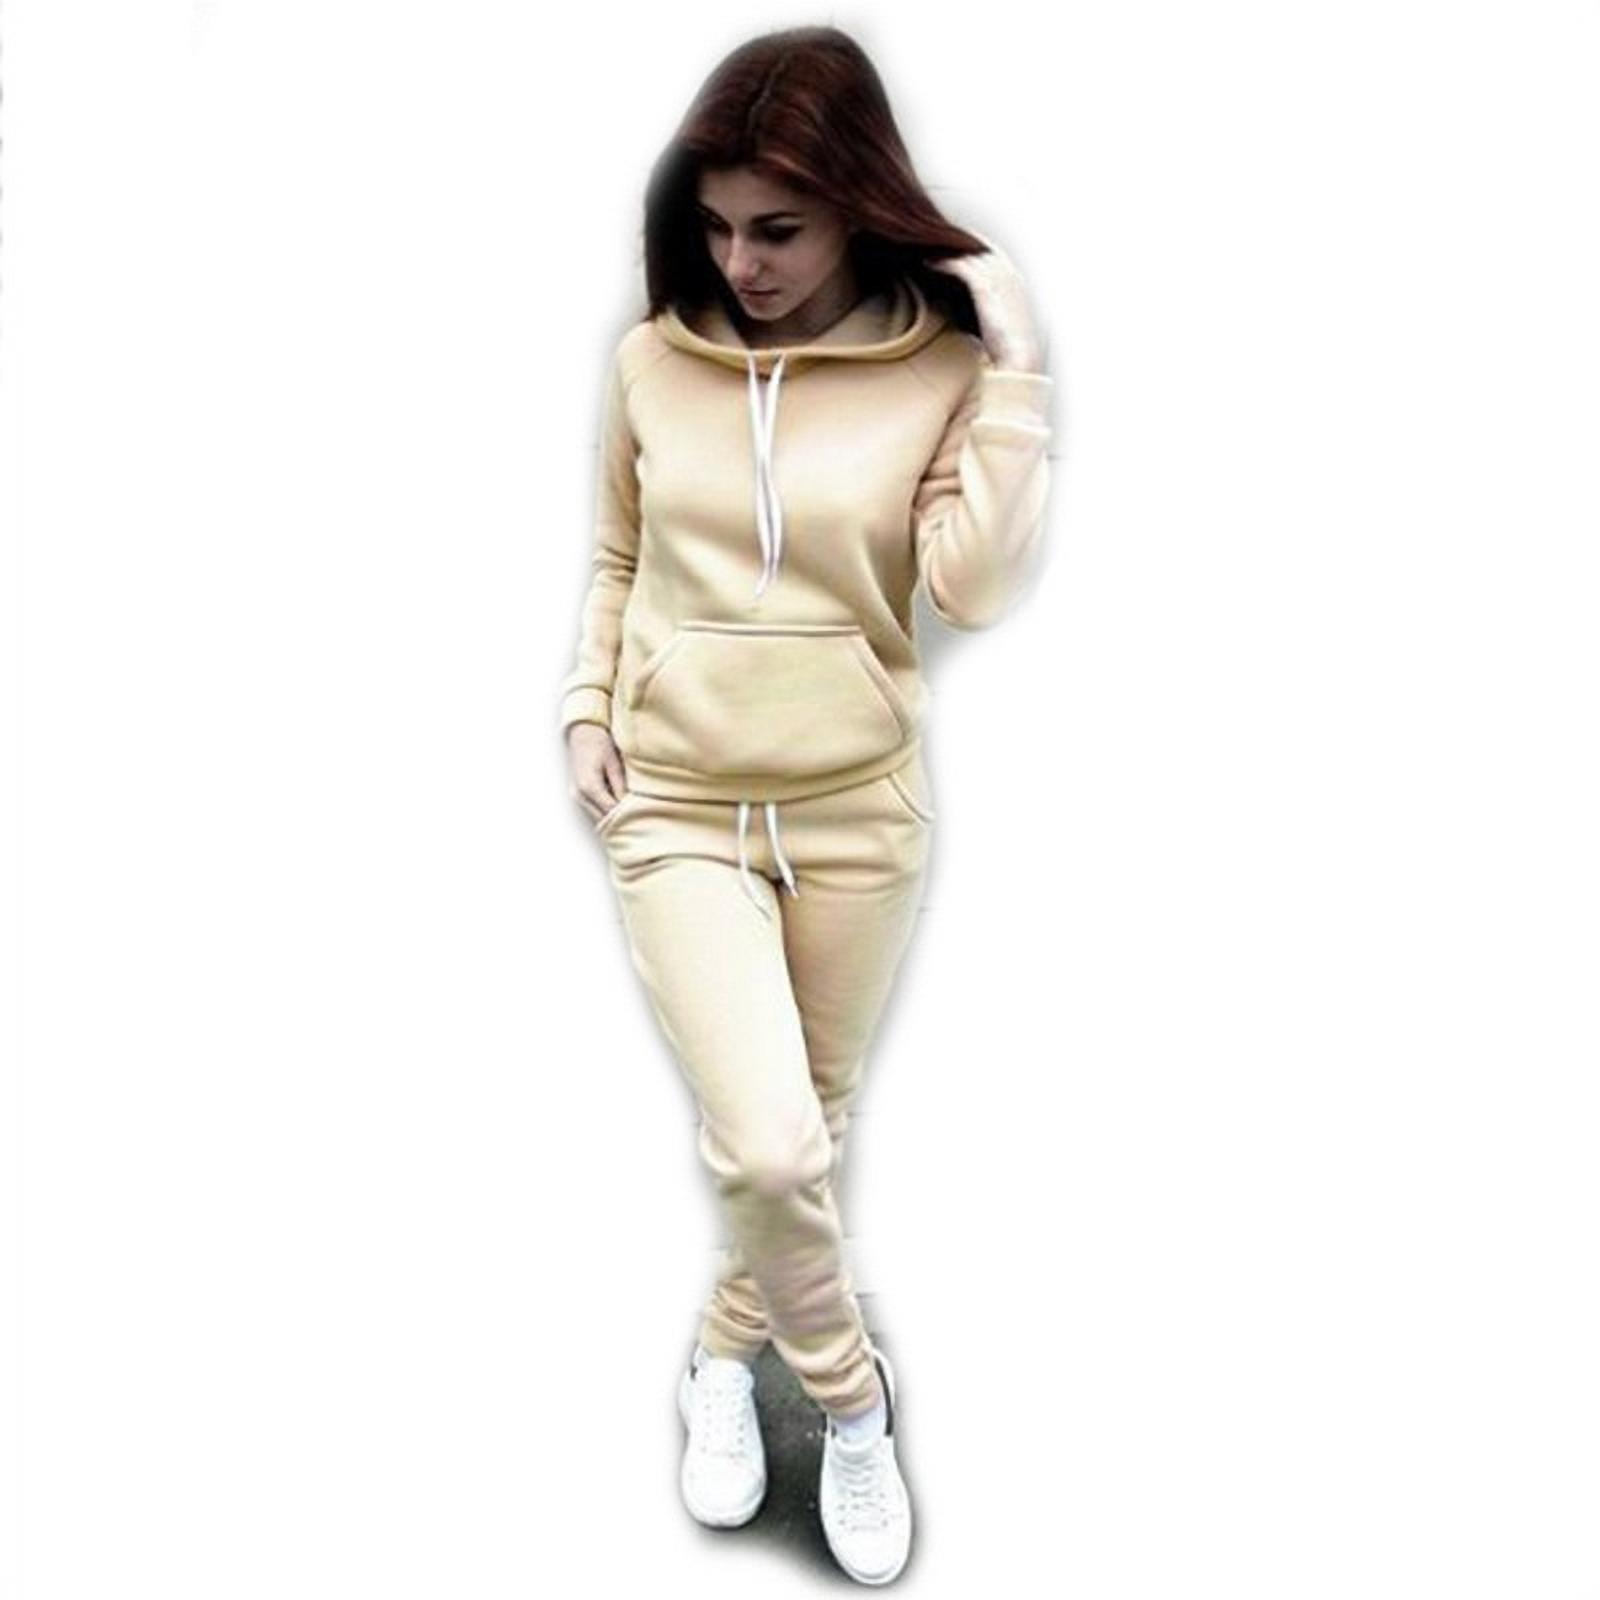 FANTADOOL Women Tracksuit Jogging Top Bottom Sport Sweat Suit Trousers Hoodie Coat Pant Autumn and Winter Women's Casual Sports Wind Fleece Side Sports Hooded Drawstring Sweater Suit Khaki XL - image 1 of 2